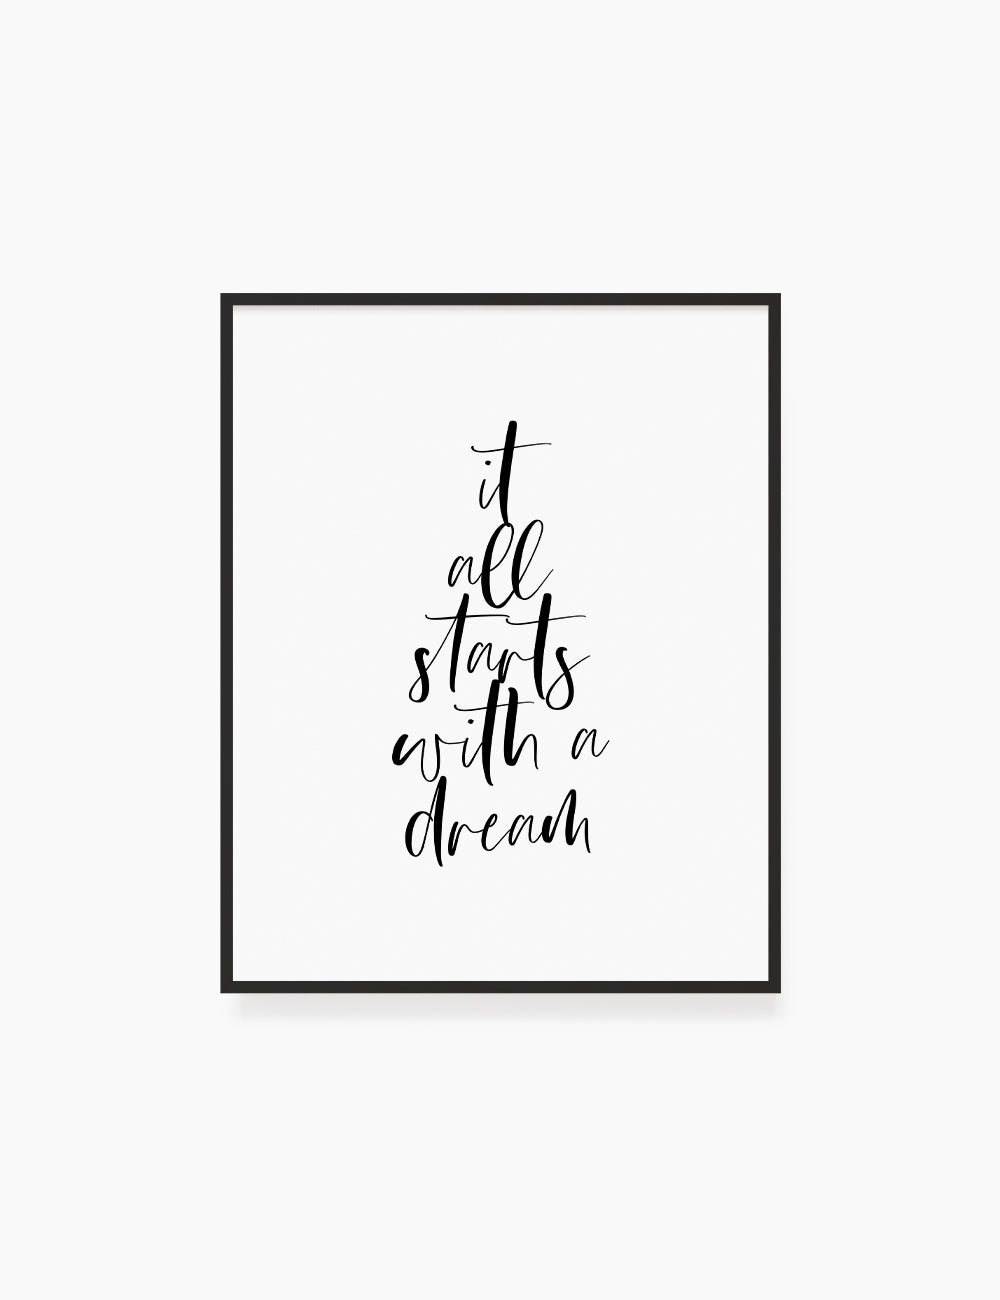 Printable Wall Art Quote: IT ALL STARTS WITH A DREAM. Printable Poster. Inspirational Quote. Motivational Quote. WA001 - Paper Moon Art & Design